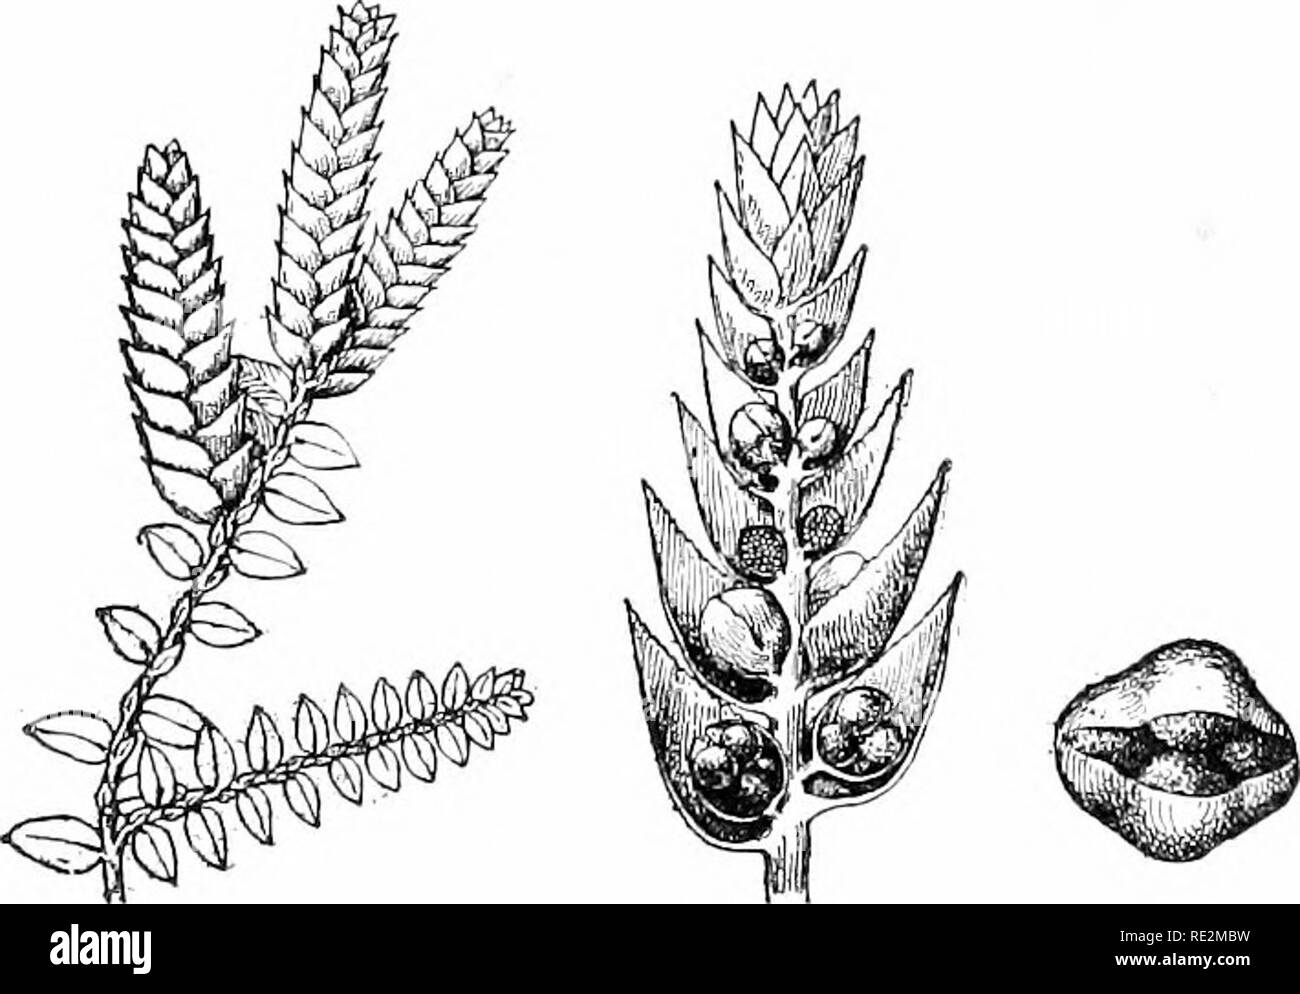 . Elementary botany. Botany. 286 MORPHOLOGY. buds which contain rudimentary shoot an&lt;l root and several thick green leaves. When they fall to the grounil lliey j^^now into new lycopodiuni plants, just as the bulbils of C}-sto[)teris do hich were described in the chapter on ferns. 583. Note.—The prothallia of the species of lycopodium which have been studied are singular objects. In L. cernuuni a cylindrical body sunk in the earth is formed, and fruni the Uj'per suriace there are gr&lt;*en lolies. In L. phlegmaria and some others slender branched, colorless bodies are formed which accordin Stock Photo